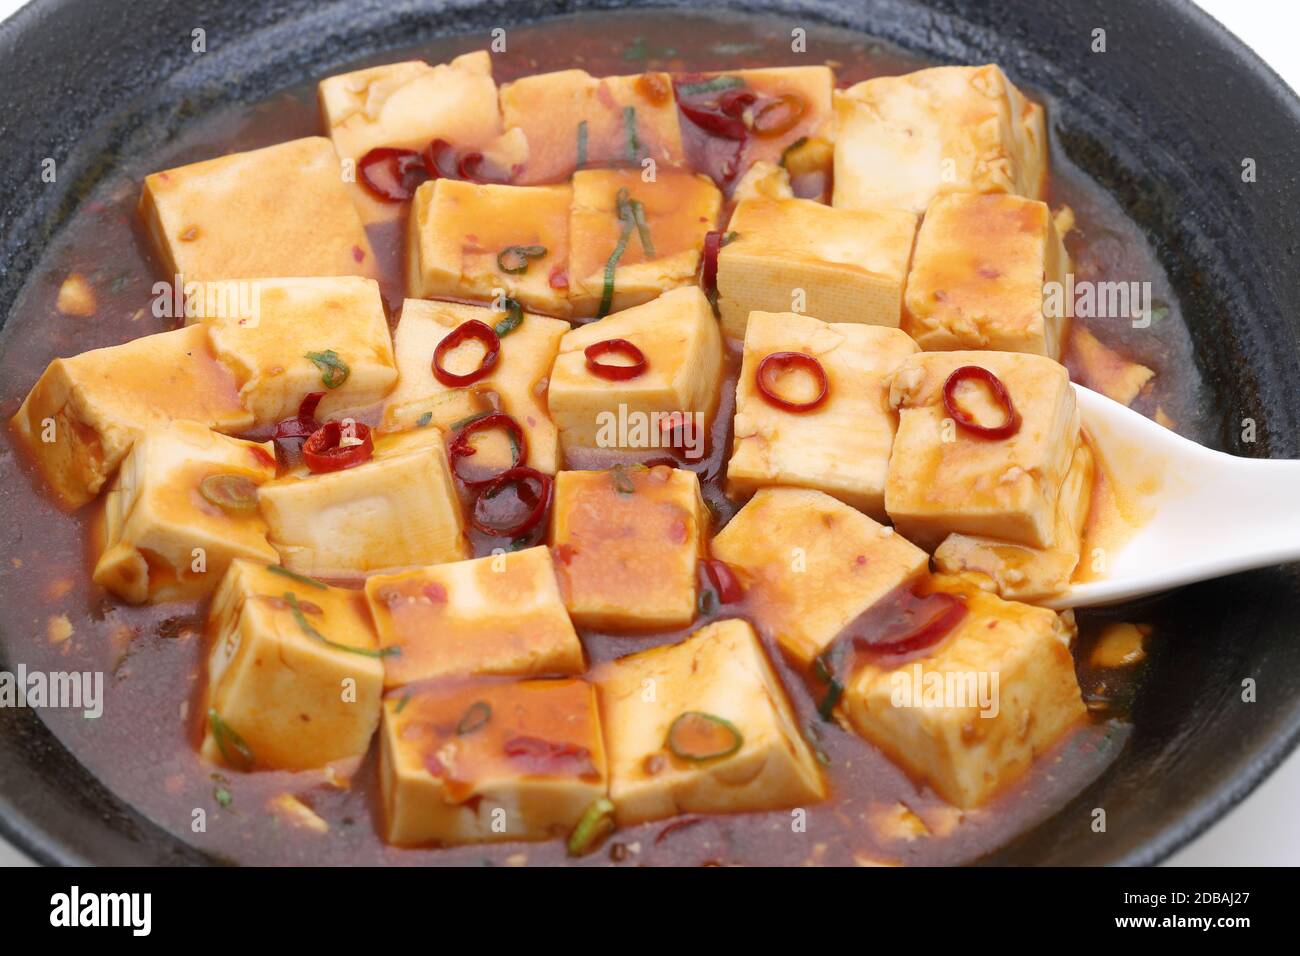 Close up of Chinese cuisine mapo tofu in a dish Stock Photo